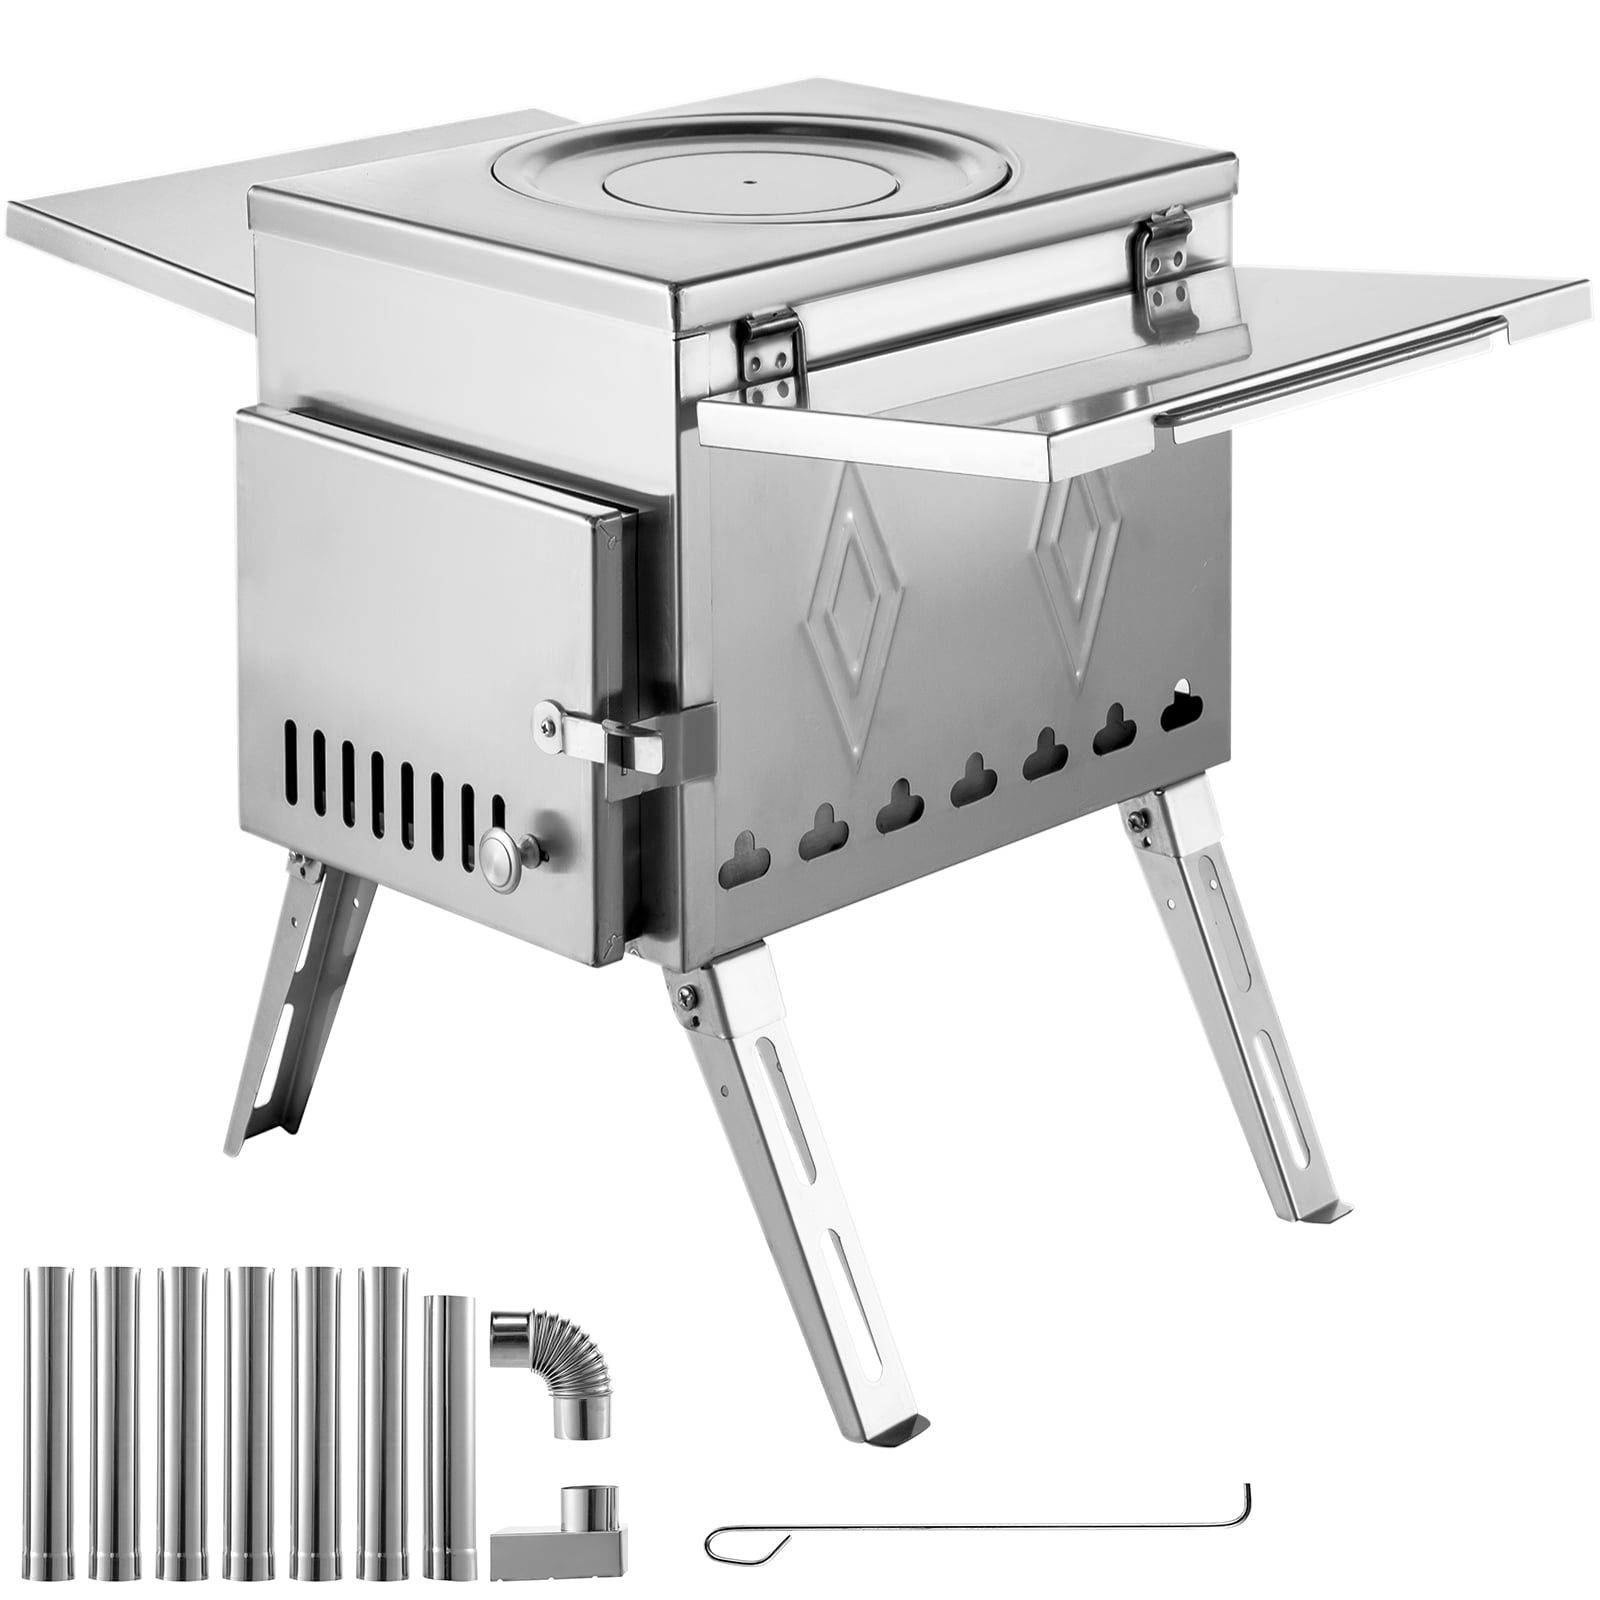 Portable Stainless Steel Lightweight Folding Wood Stove Outdoor Camping New A4M6